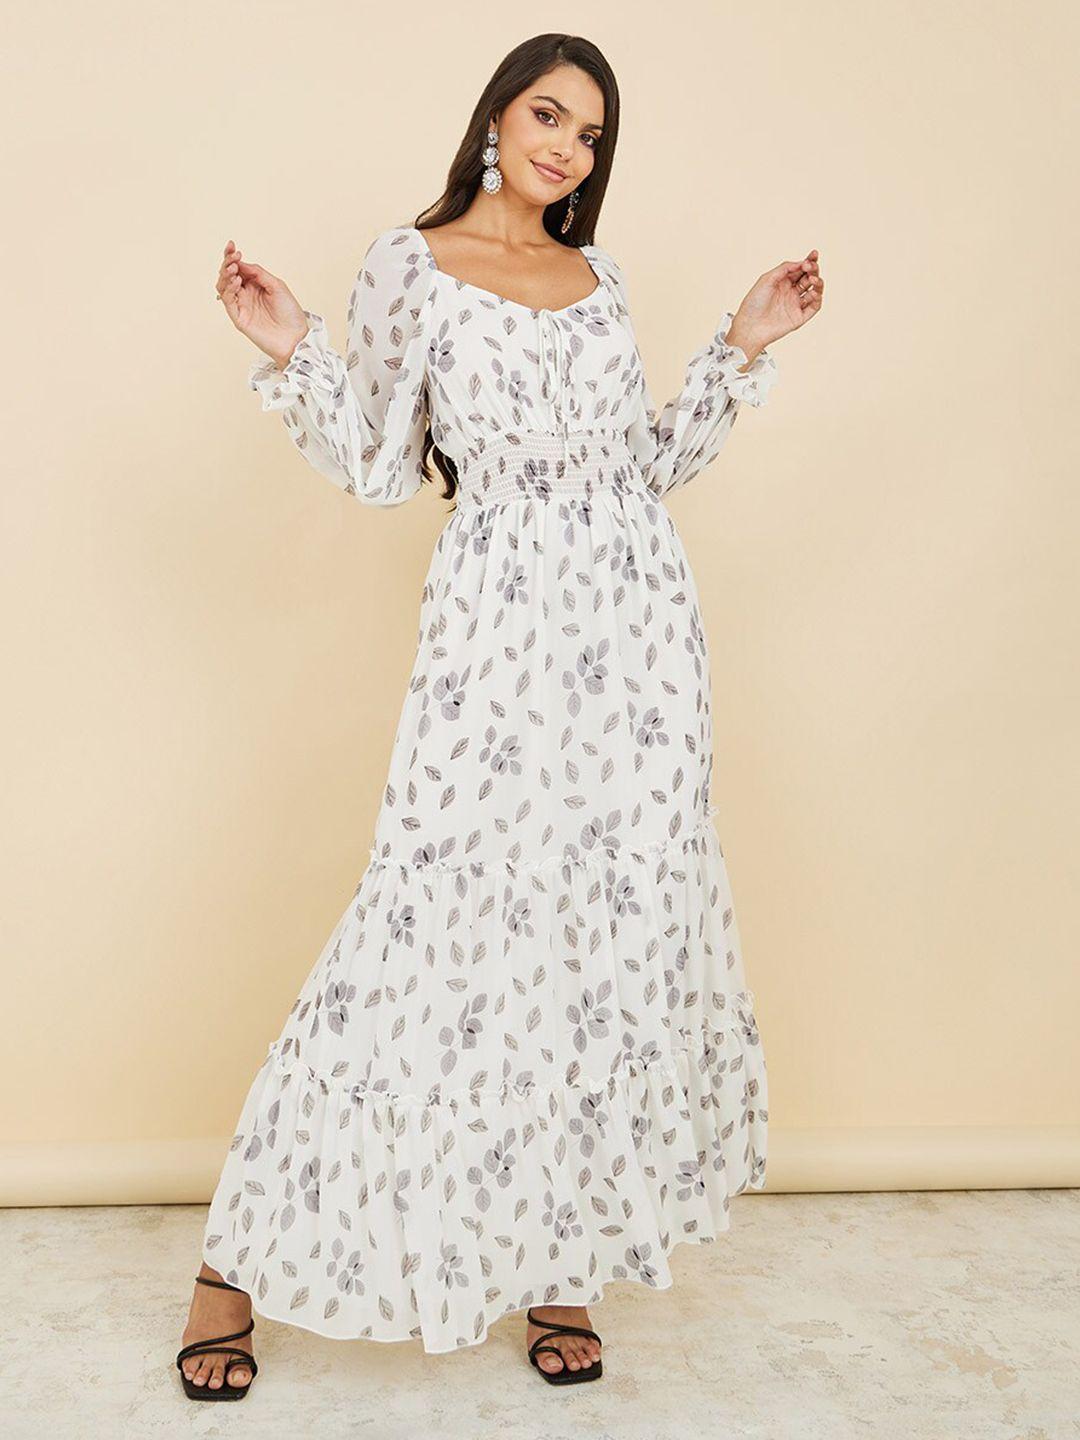 styli-white-floral-print-bell-sleeve-maxi-dress